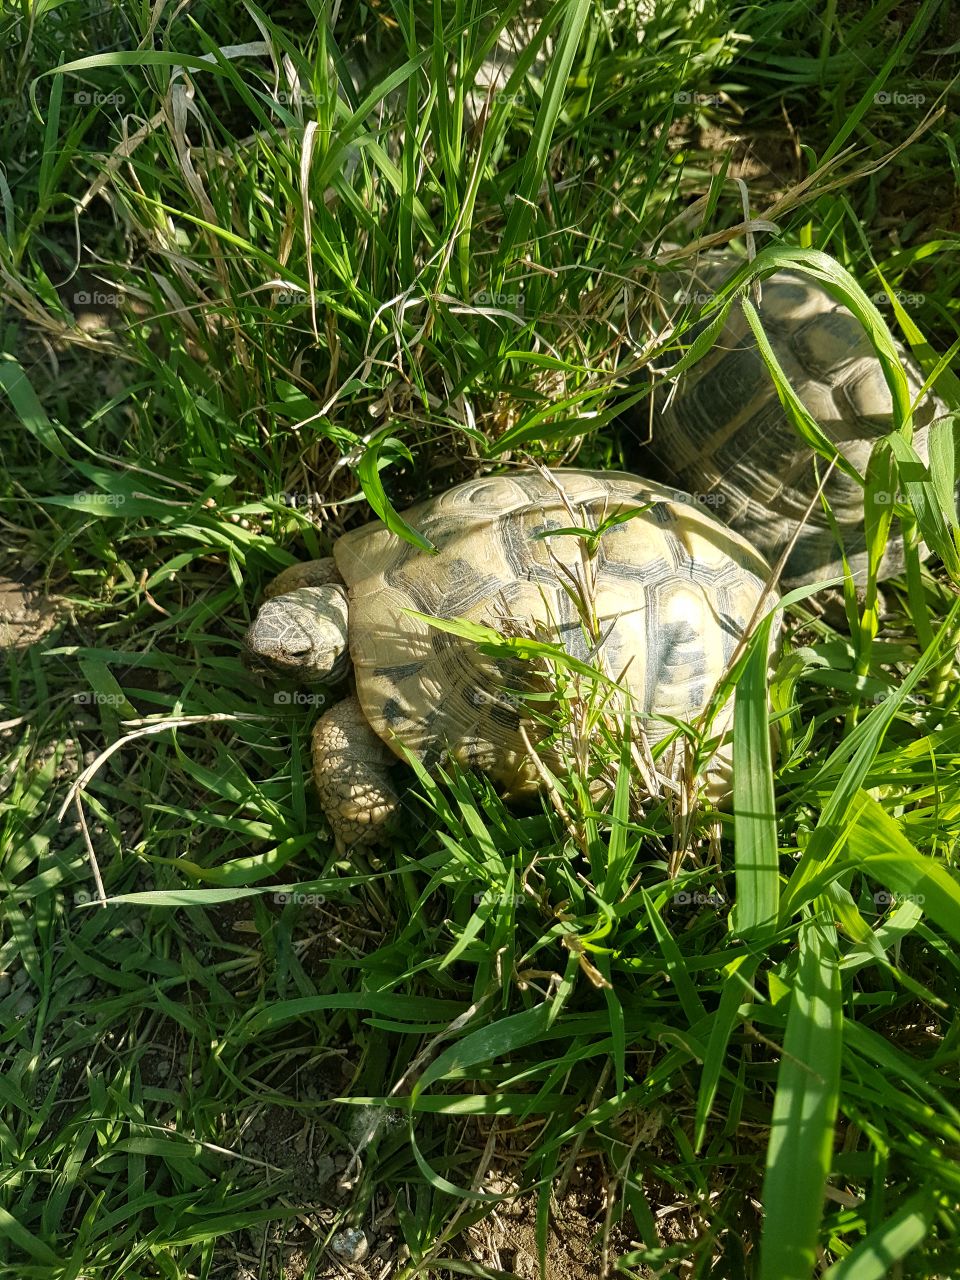 Turtles in the grass of a garden in springtime